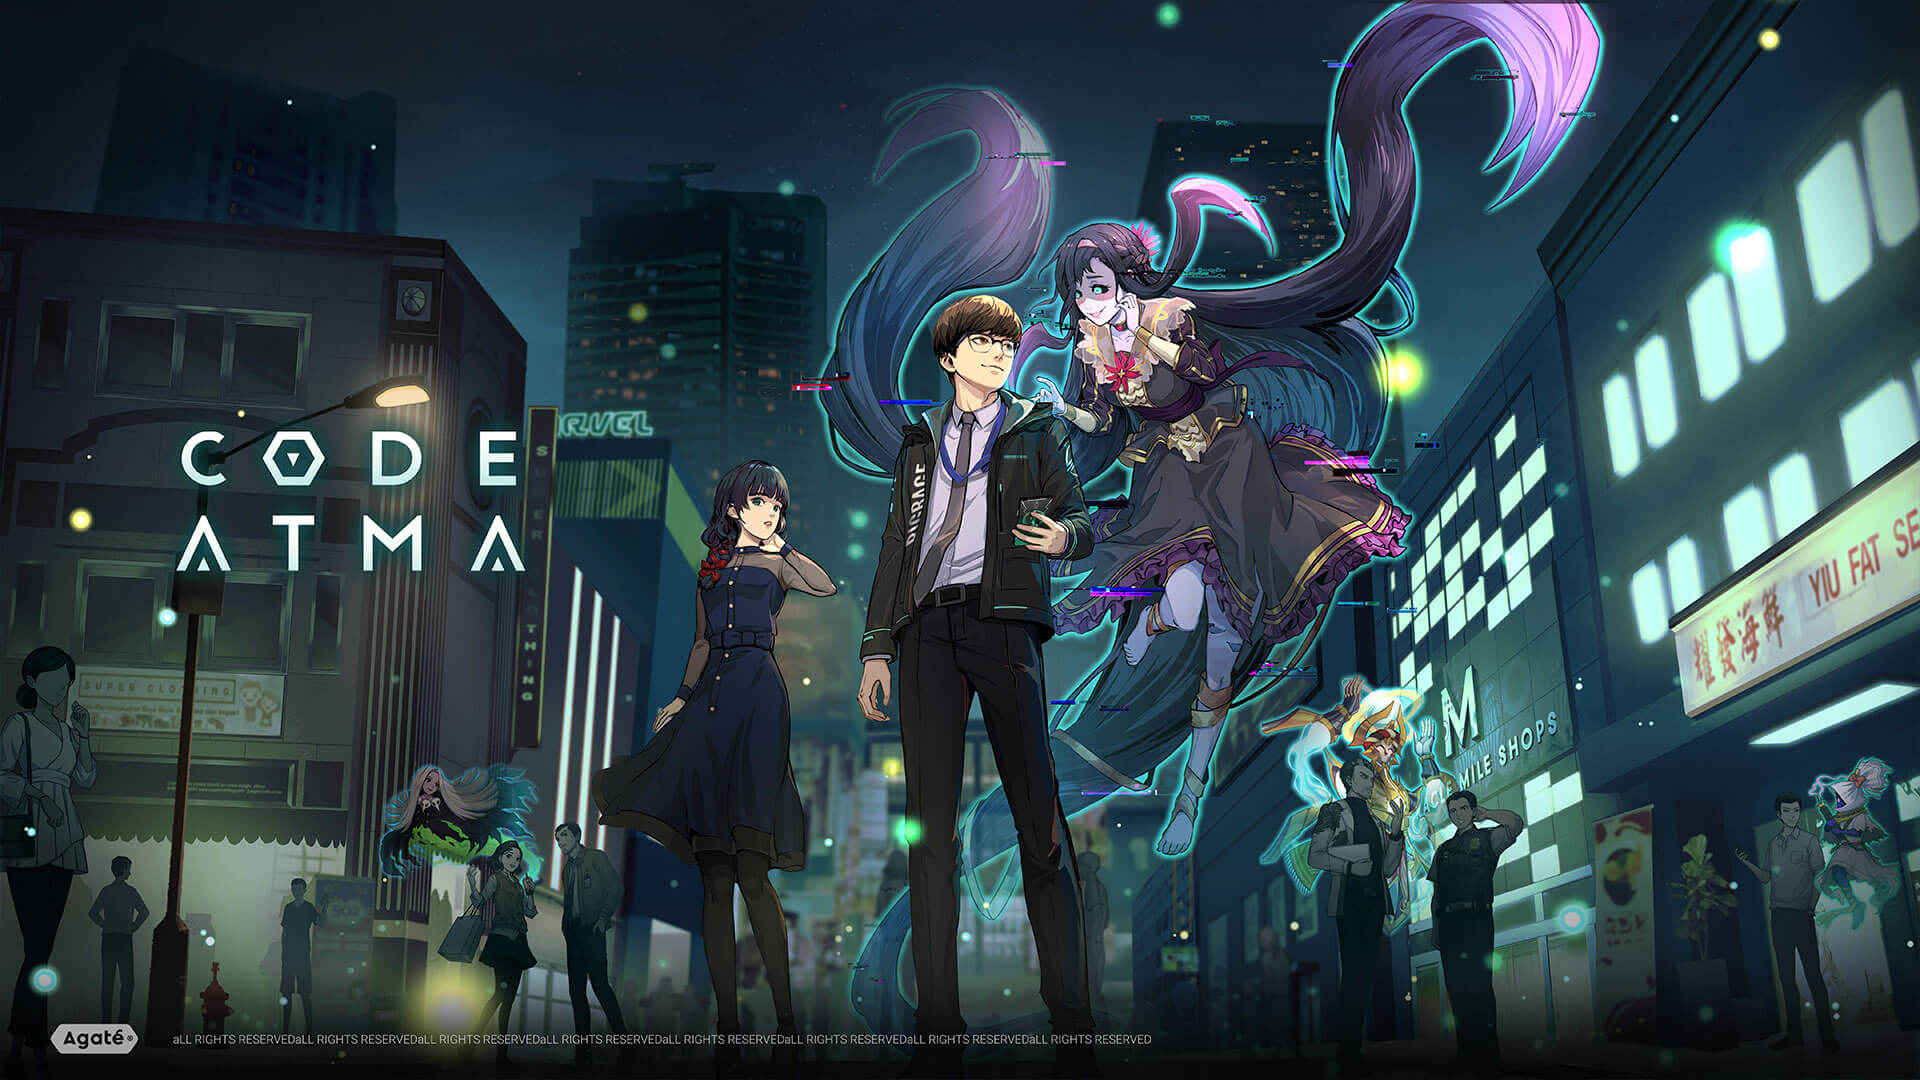 poster of code atma city scene at night with characters and their atma